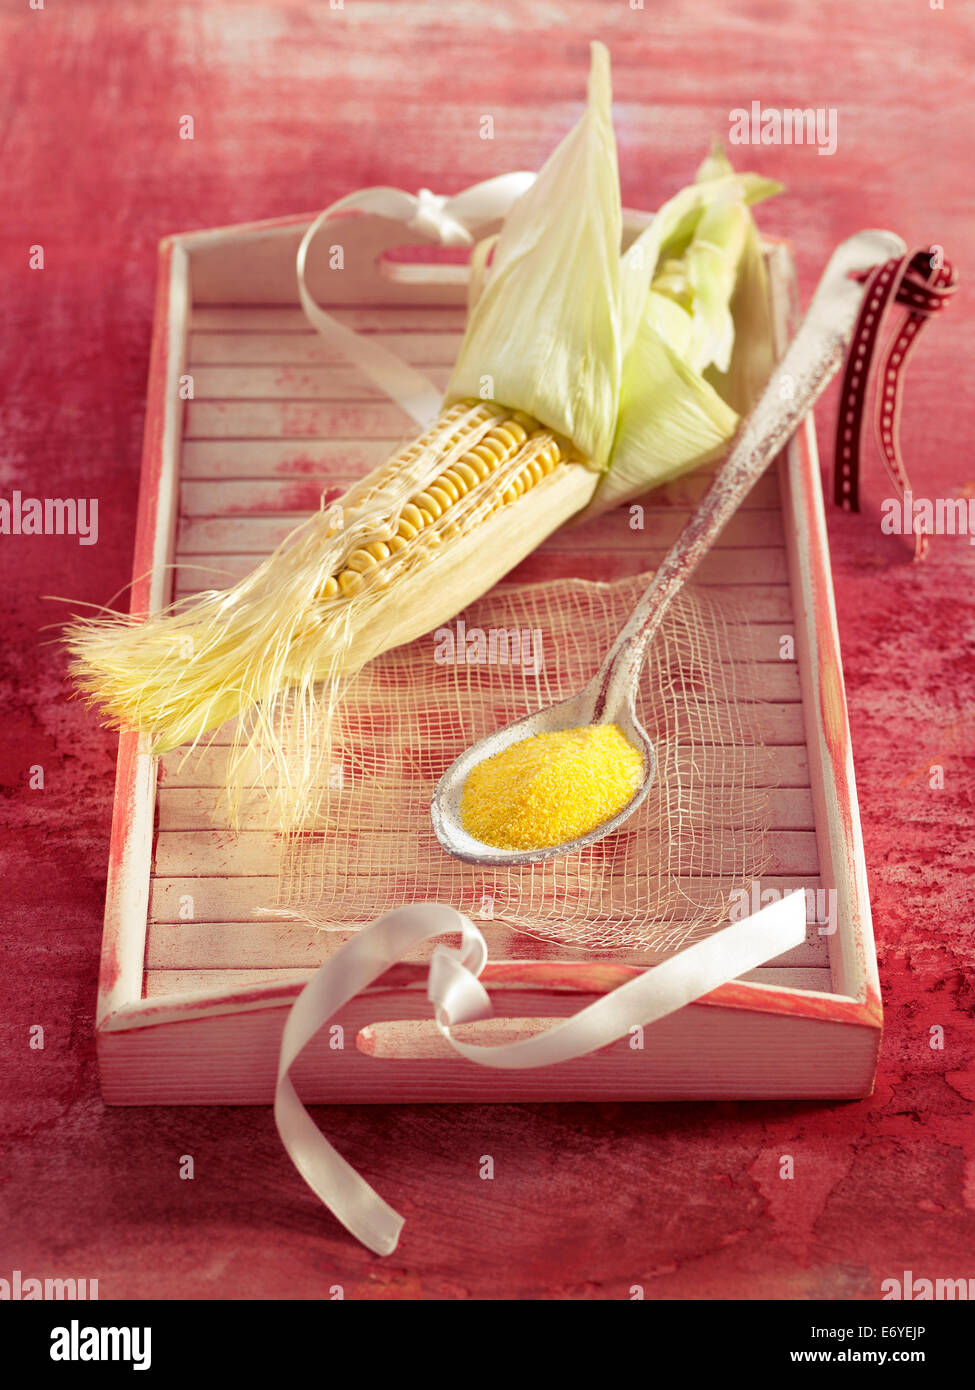 Corn on the cob and a spoonful of polenta Stock Photo